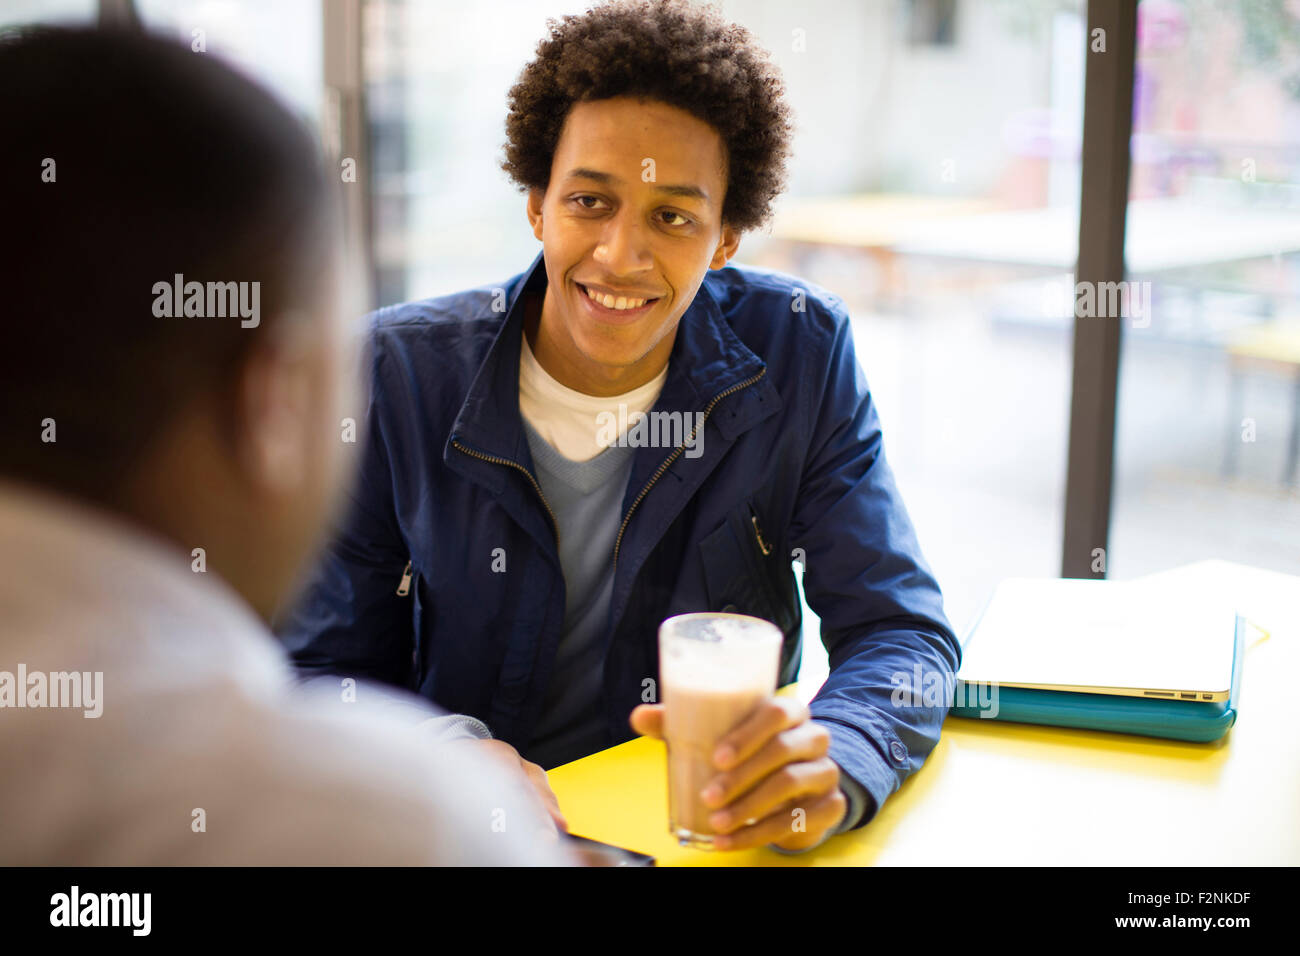 Men drinking coffee in cafe Stock Photo